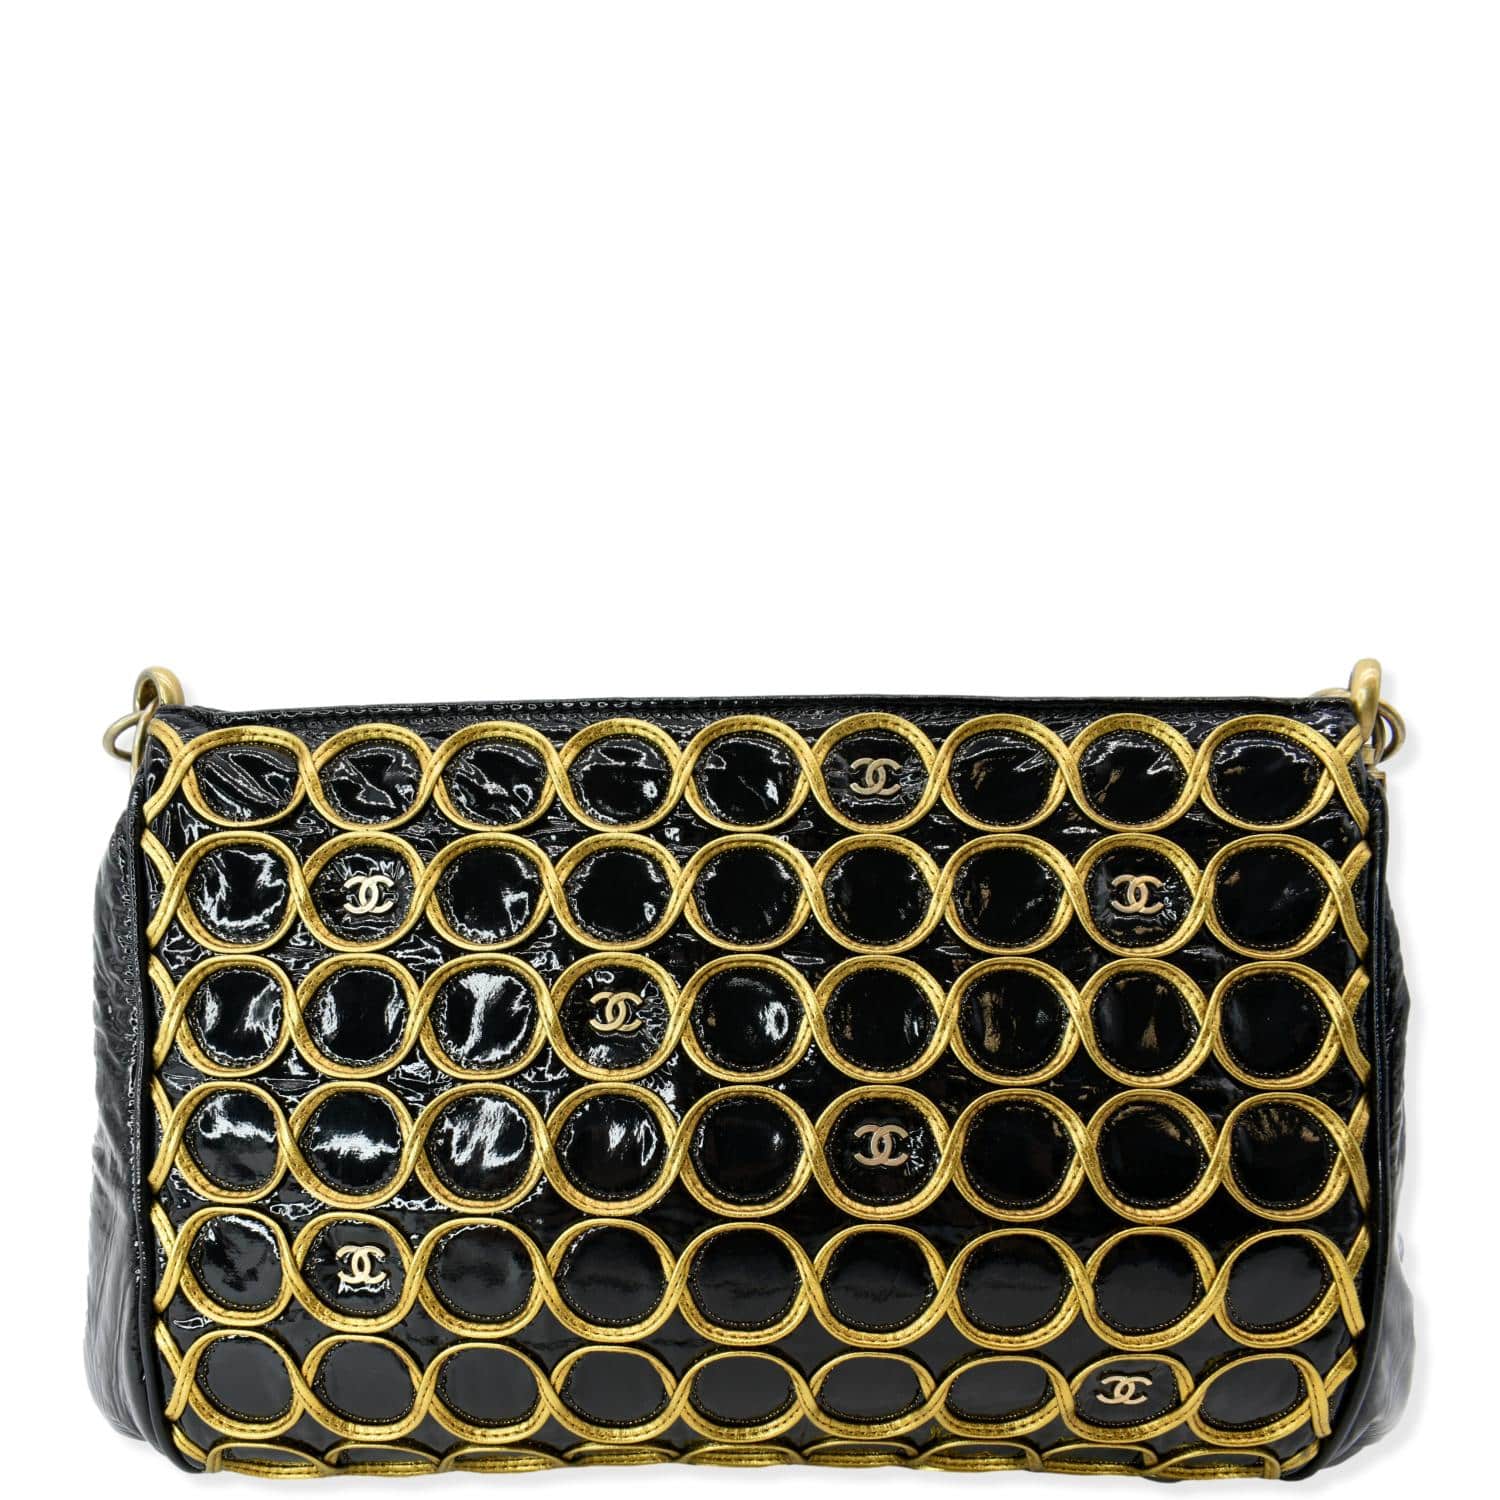 Chanel Patent Quilted Evening Clutch with Chain